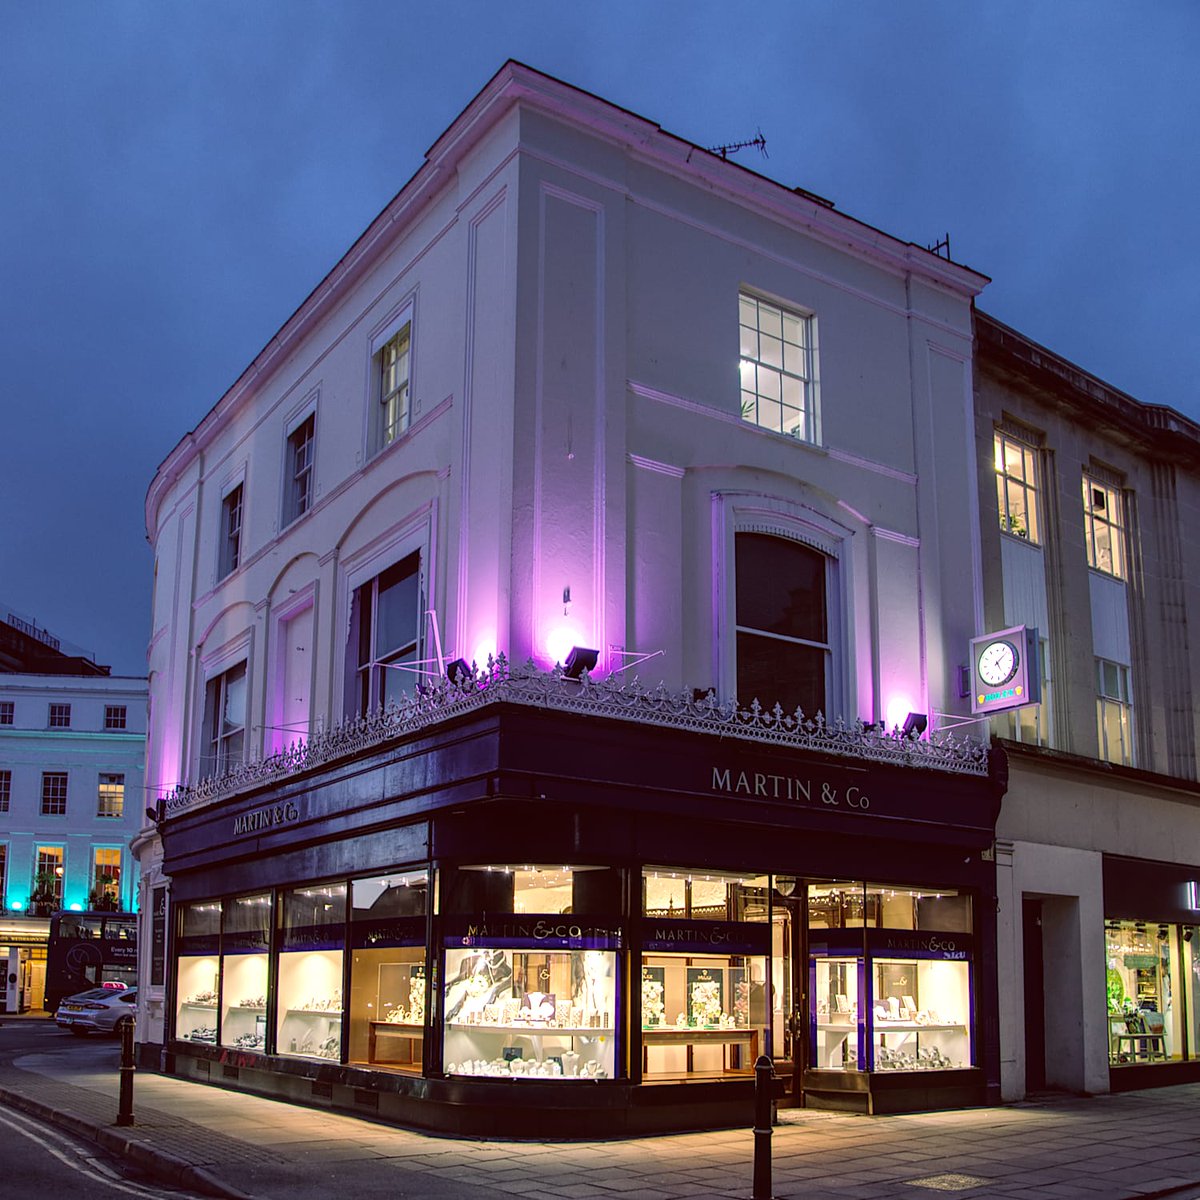 Looking for watches, jewellery, gifts, repairs, a battery, valuations or perhaps some advice? We’re here to help - do come and say hello tomorrow or call us on 01242 522821.

 #cheltenham #jewelleryshop #luxurywatches

martin-and-co.com